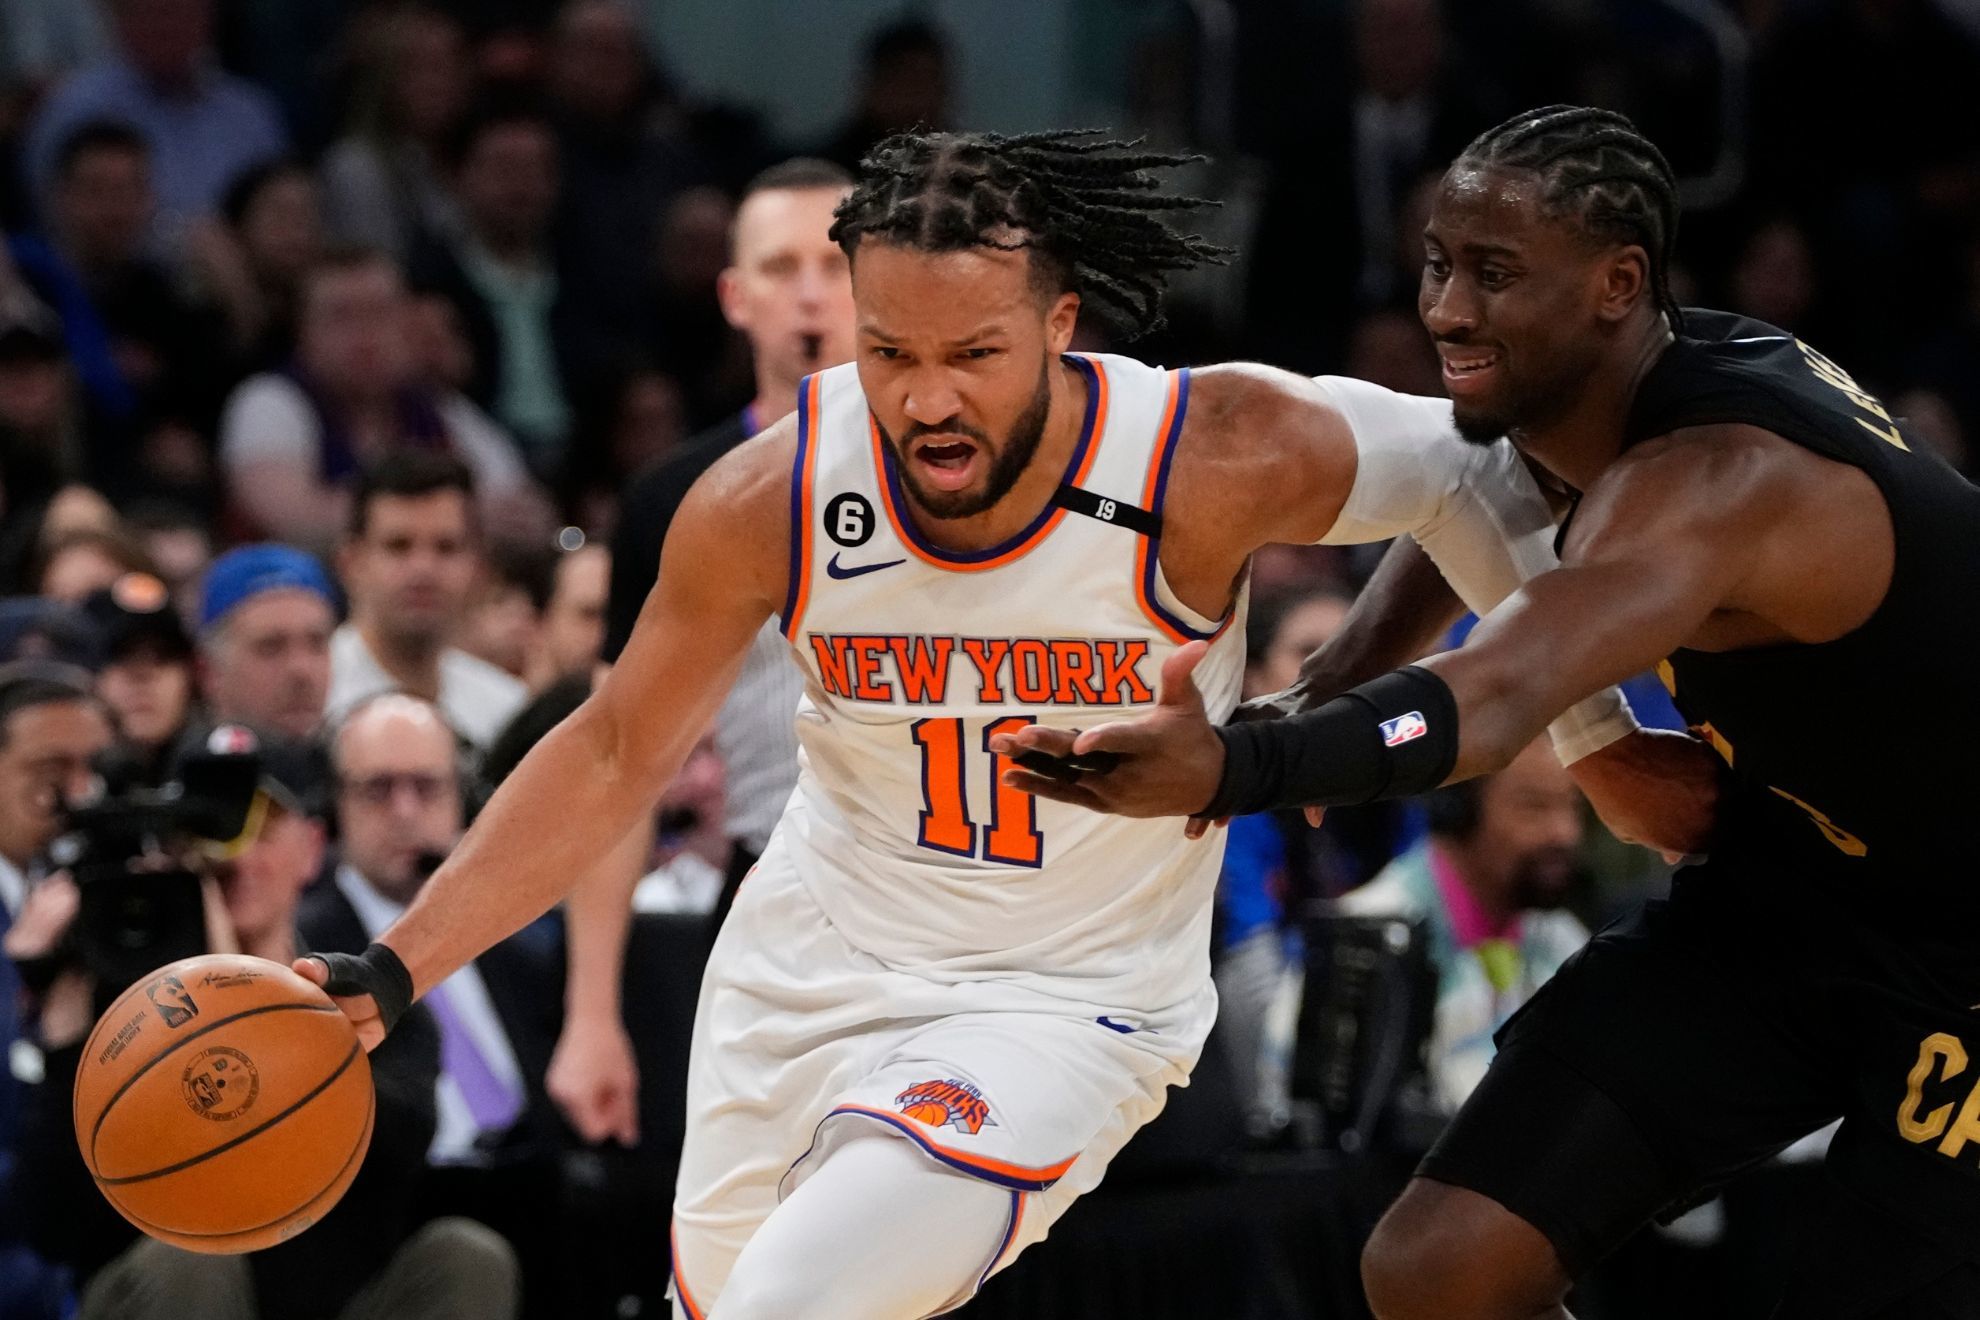 Jalen Brunson leads Knicks past Cavaliers to take series lead at MSG